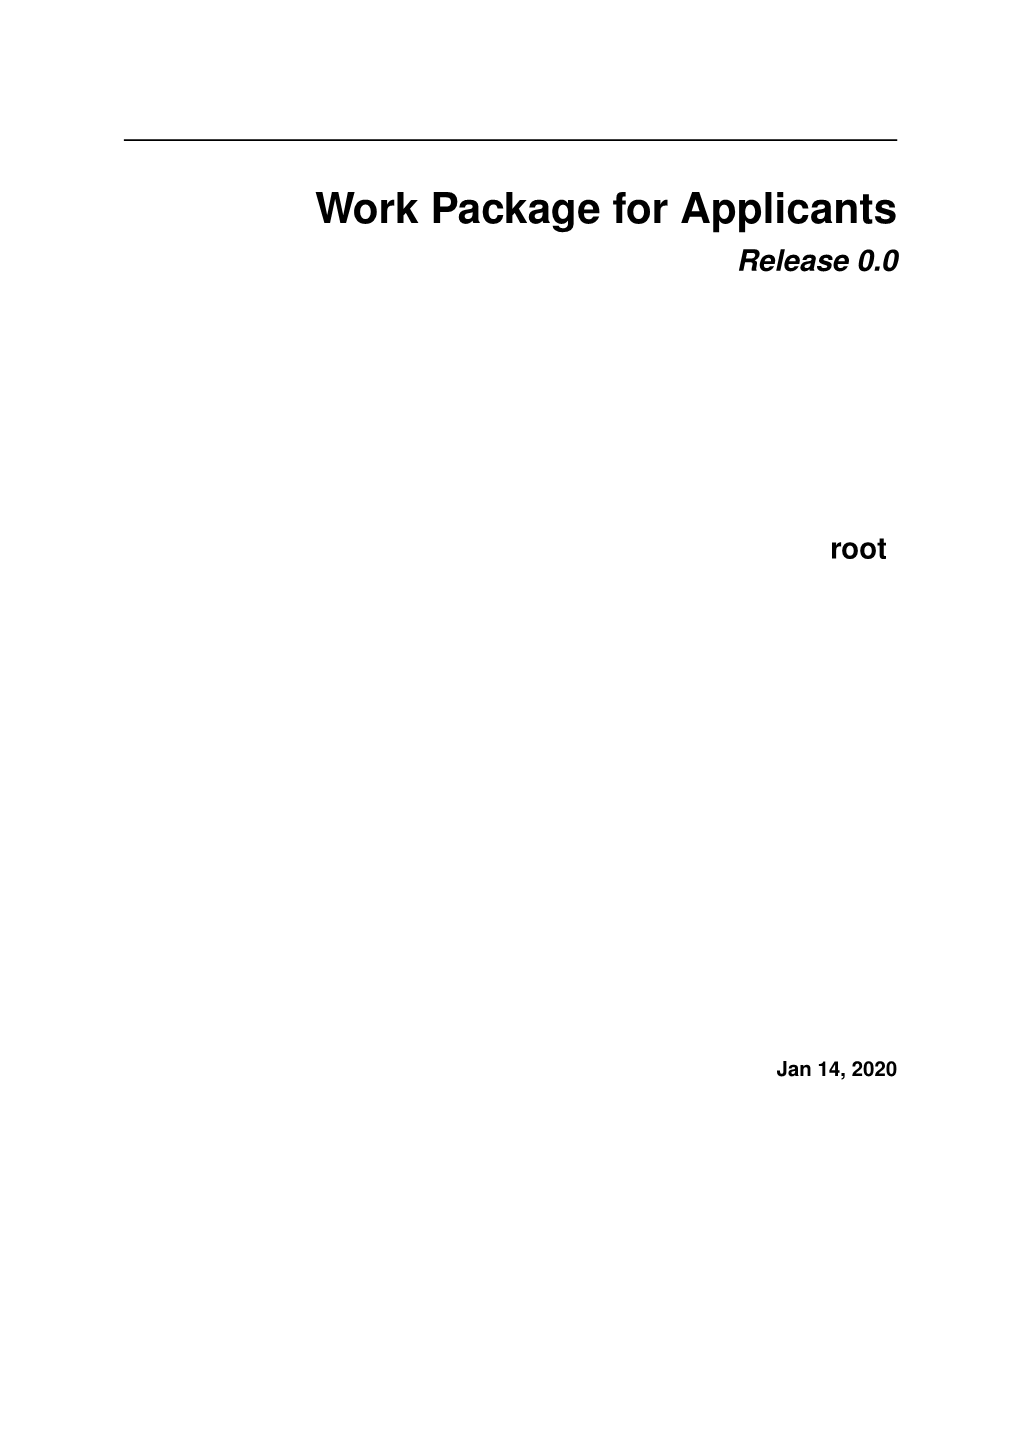 Work Package for Applicants Release 0.0